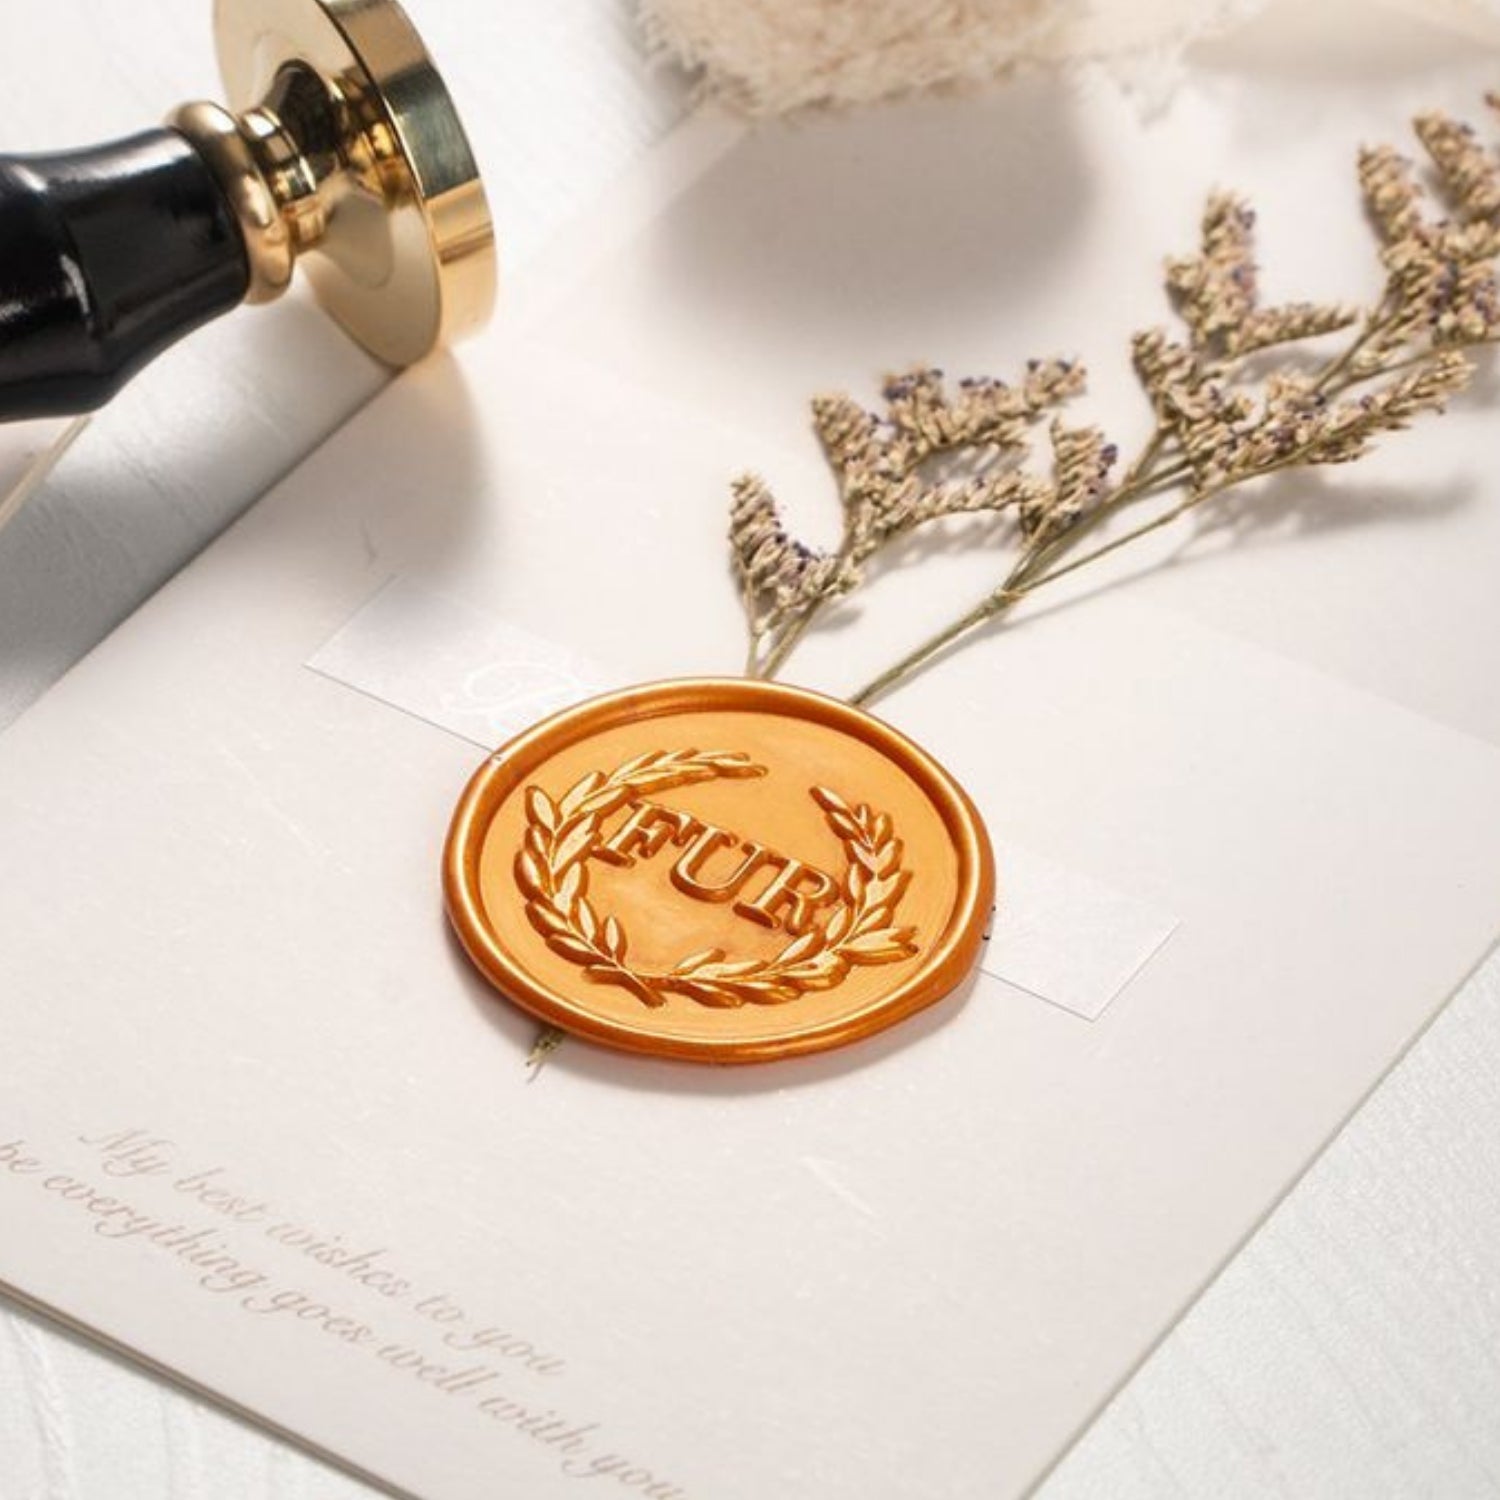 Custom Design Wax Seal Stamp with Your Artwork -1 11